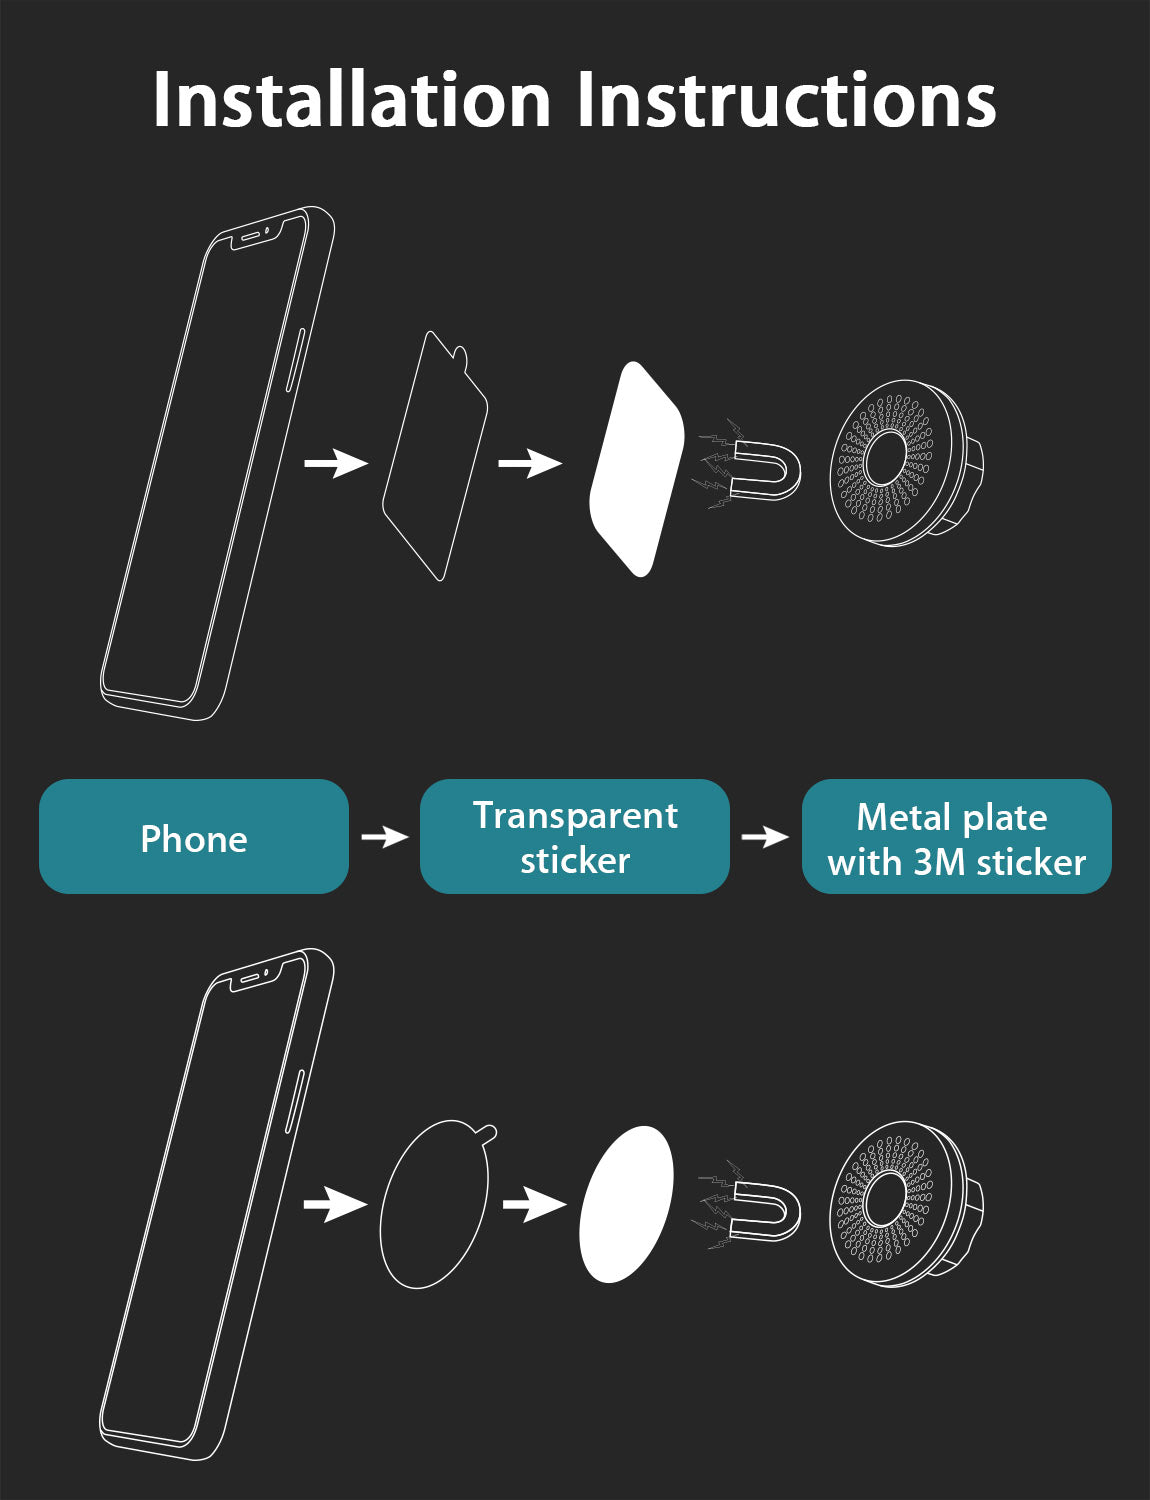 Installation guide: Apply a transparent sticker to the back of your phone and attach the metal plate with 3M adhesive to enhance magnetic strength. 